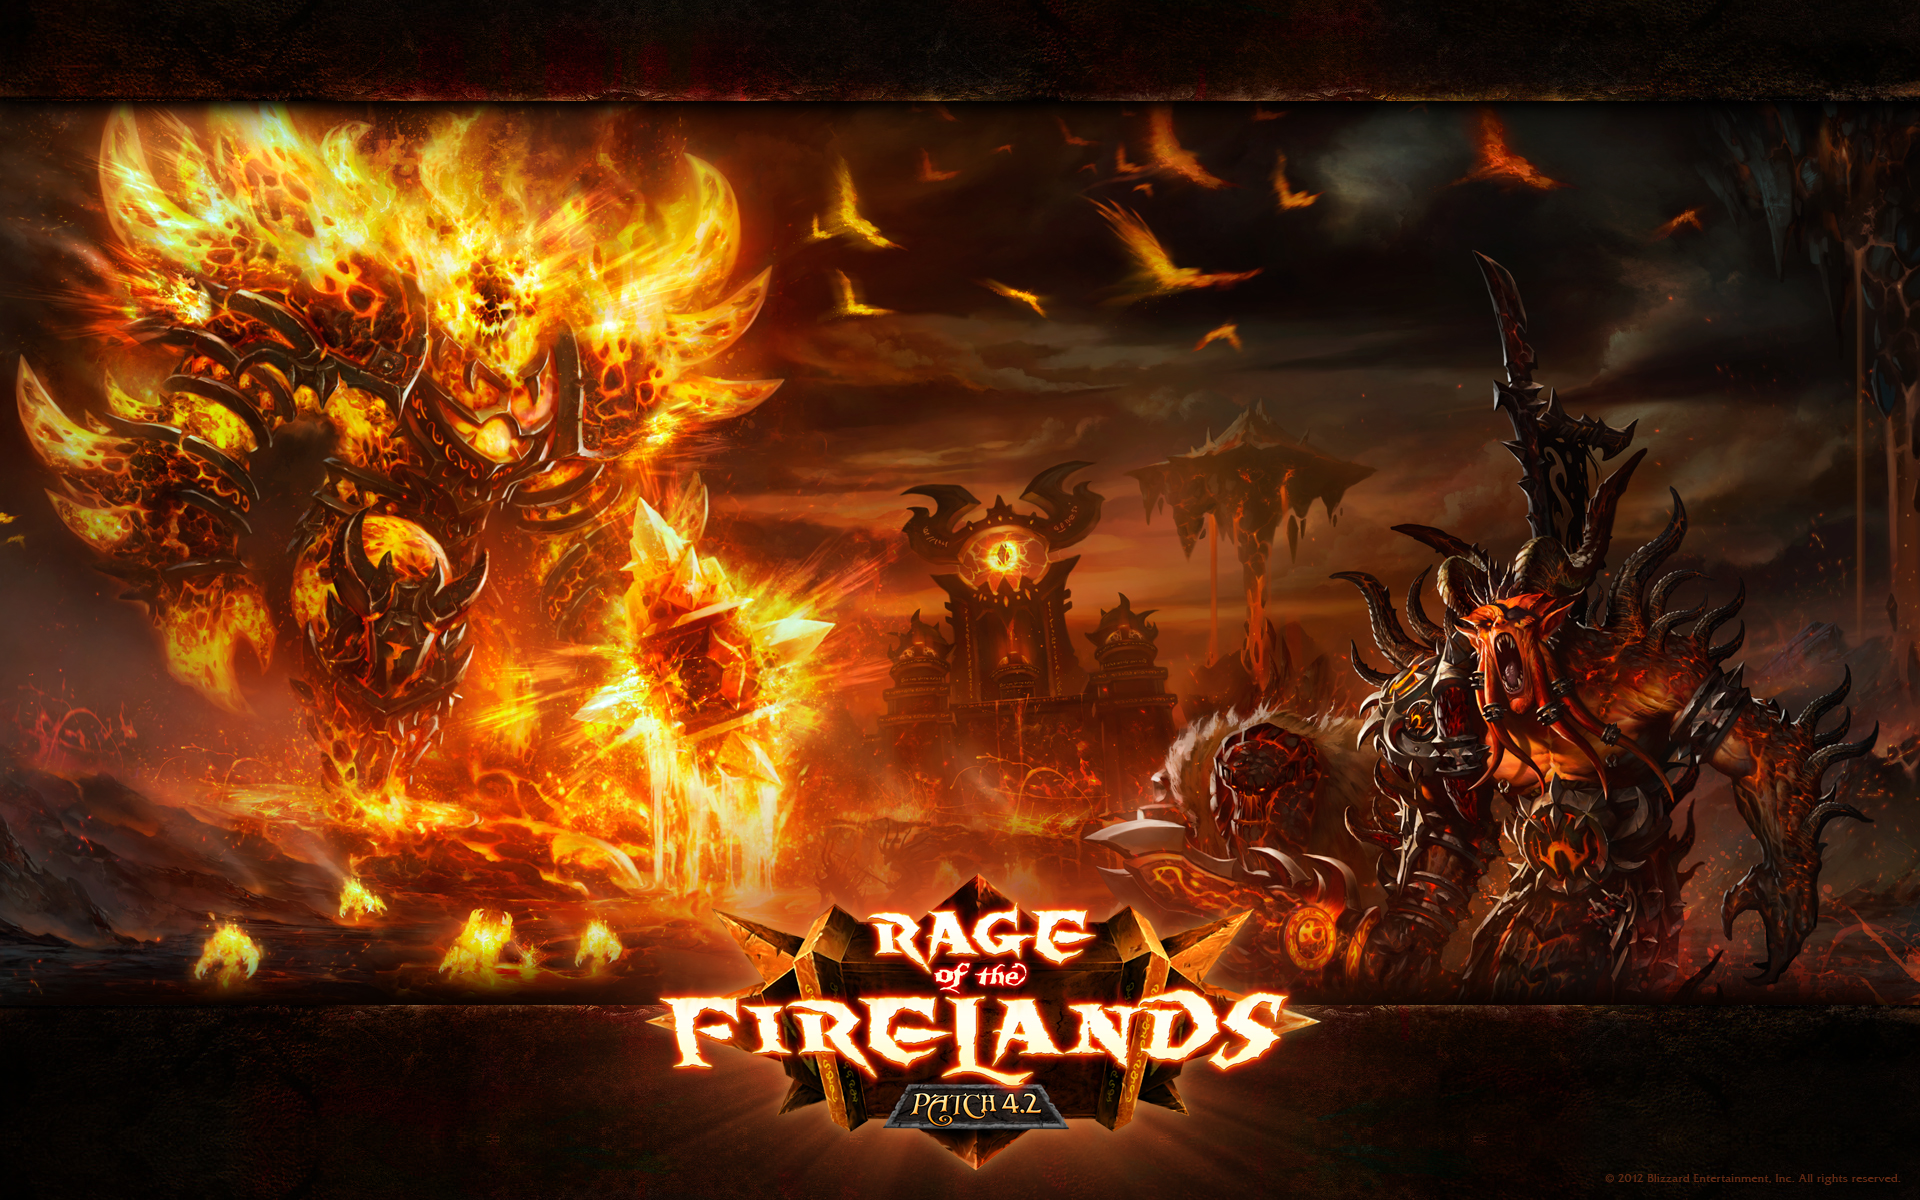 search for wallpapers on Firelands  Patch  Wallpapers  Media  Wow   480475